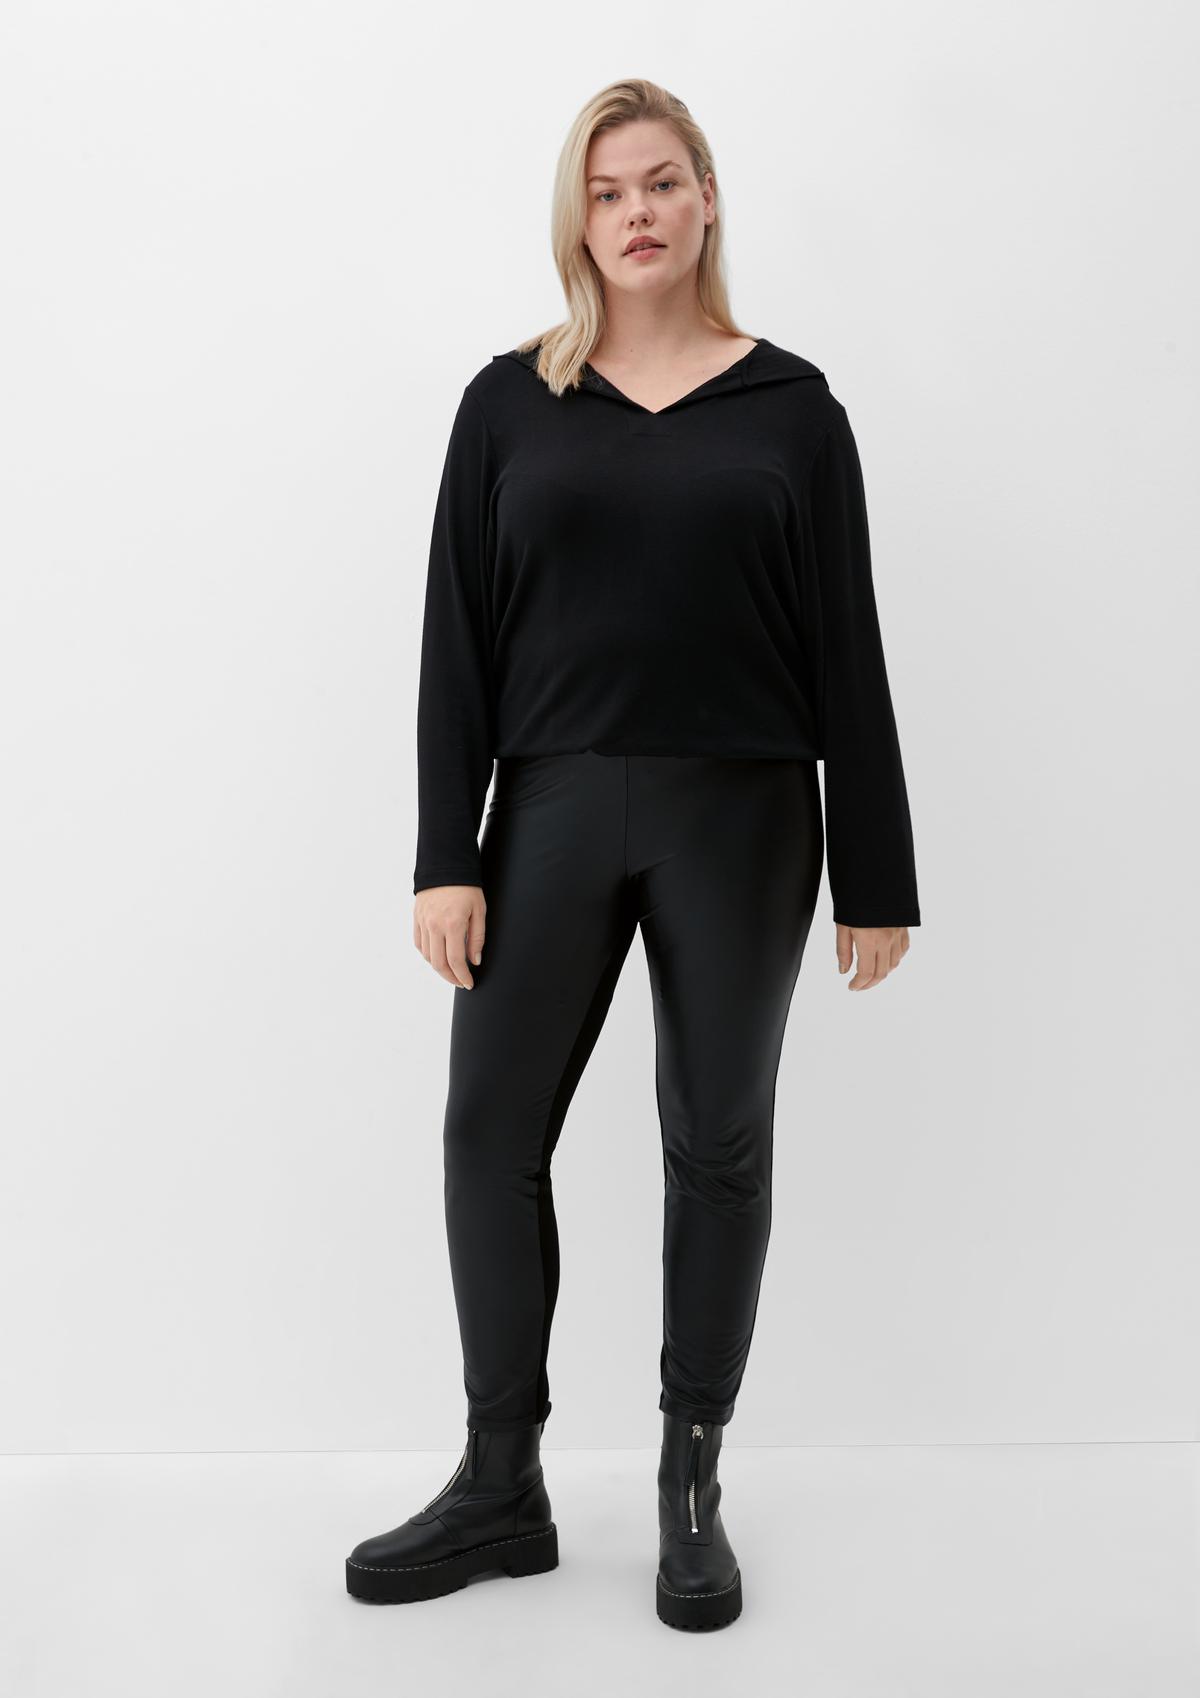 Leggings with a leather-look front